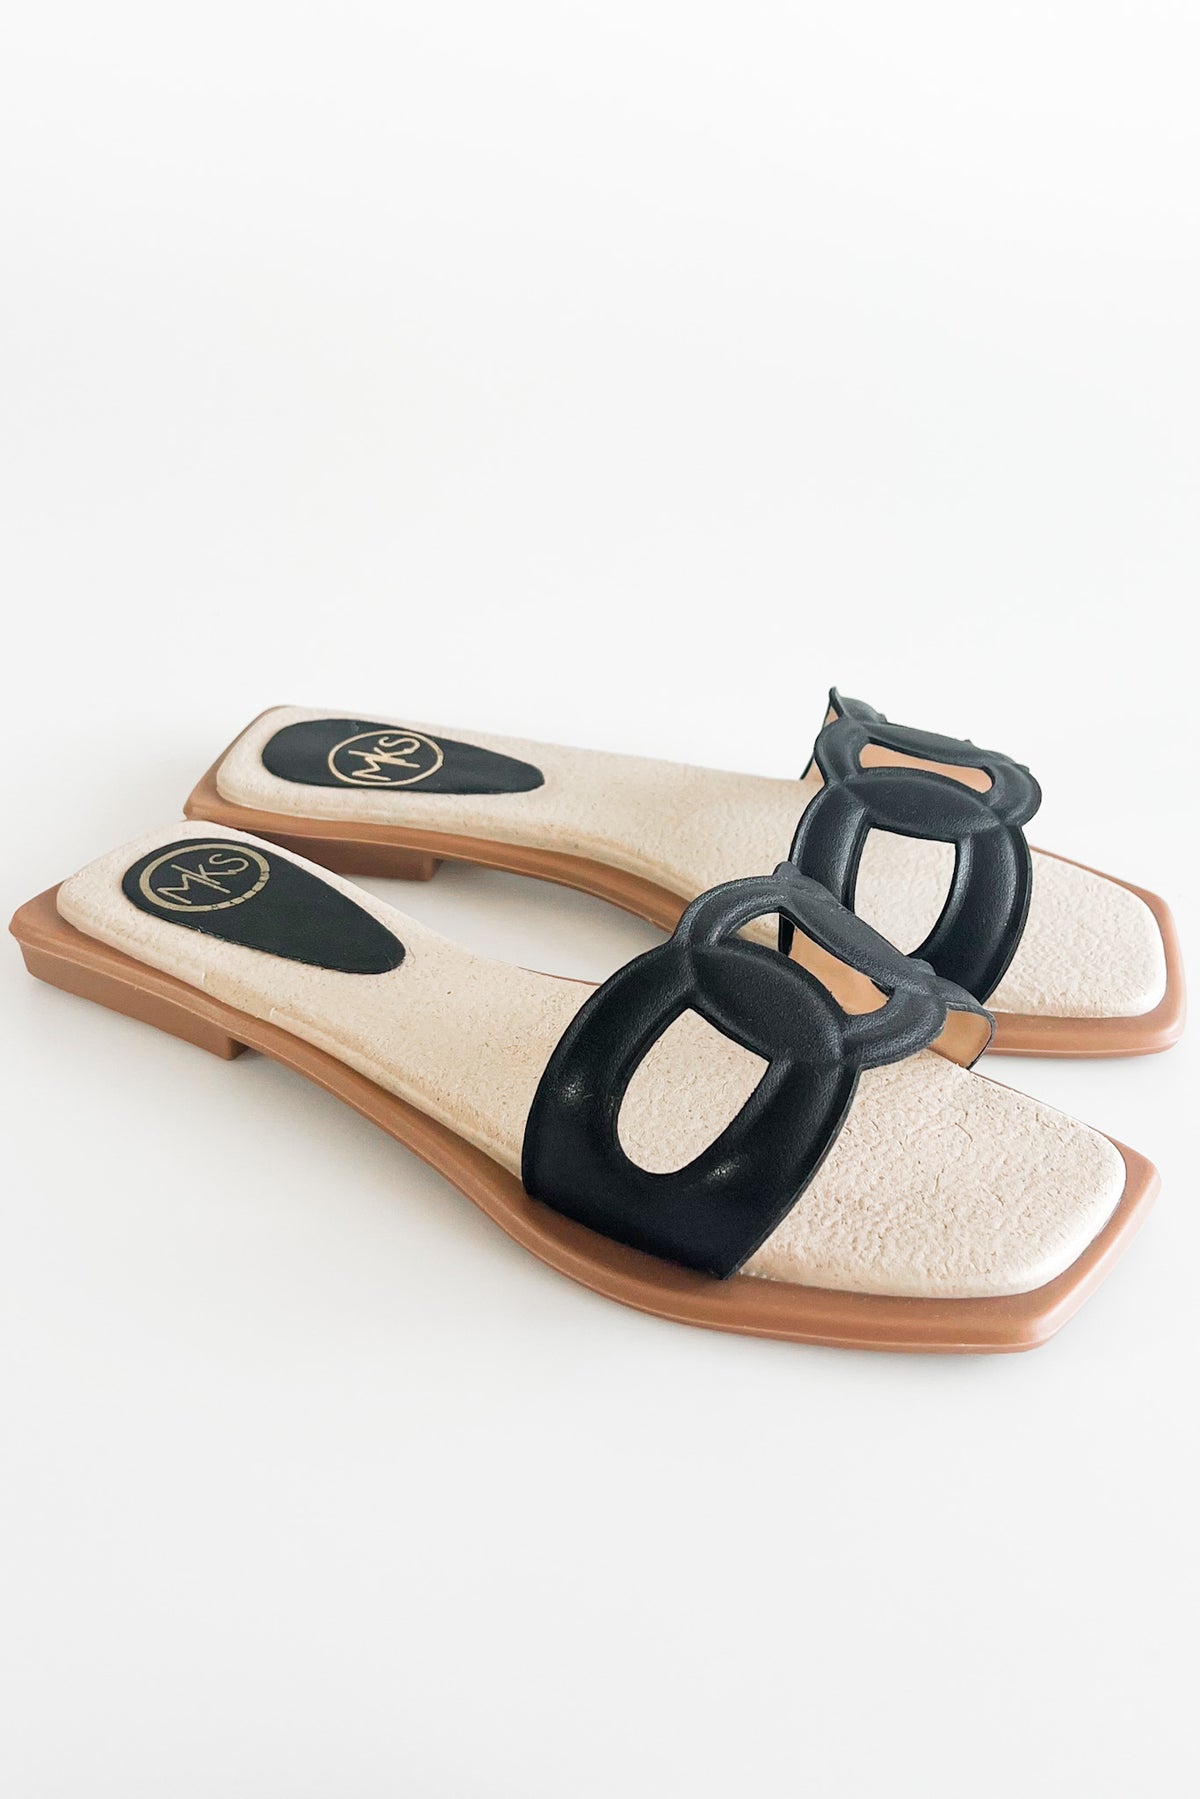 Triple Circles Strap Sandal - Black-250 Shoes-MAKER'S SHOES-Coastal Bloom Boutique, find the trendiest versions of the popular styles and looks Located in Indialantic, FL